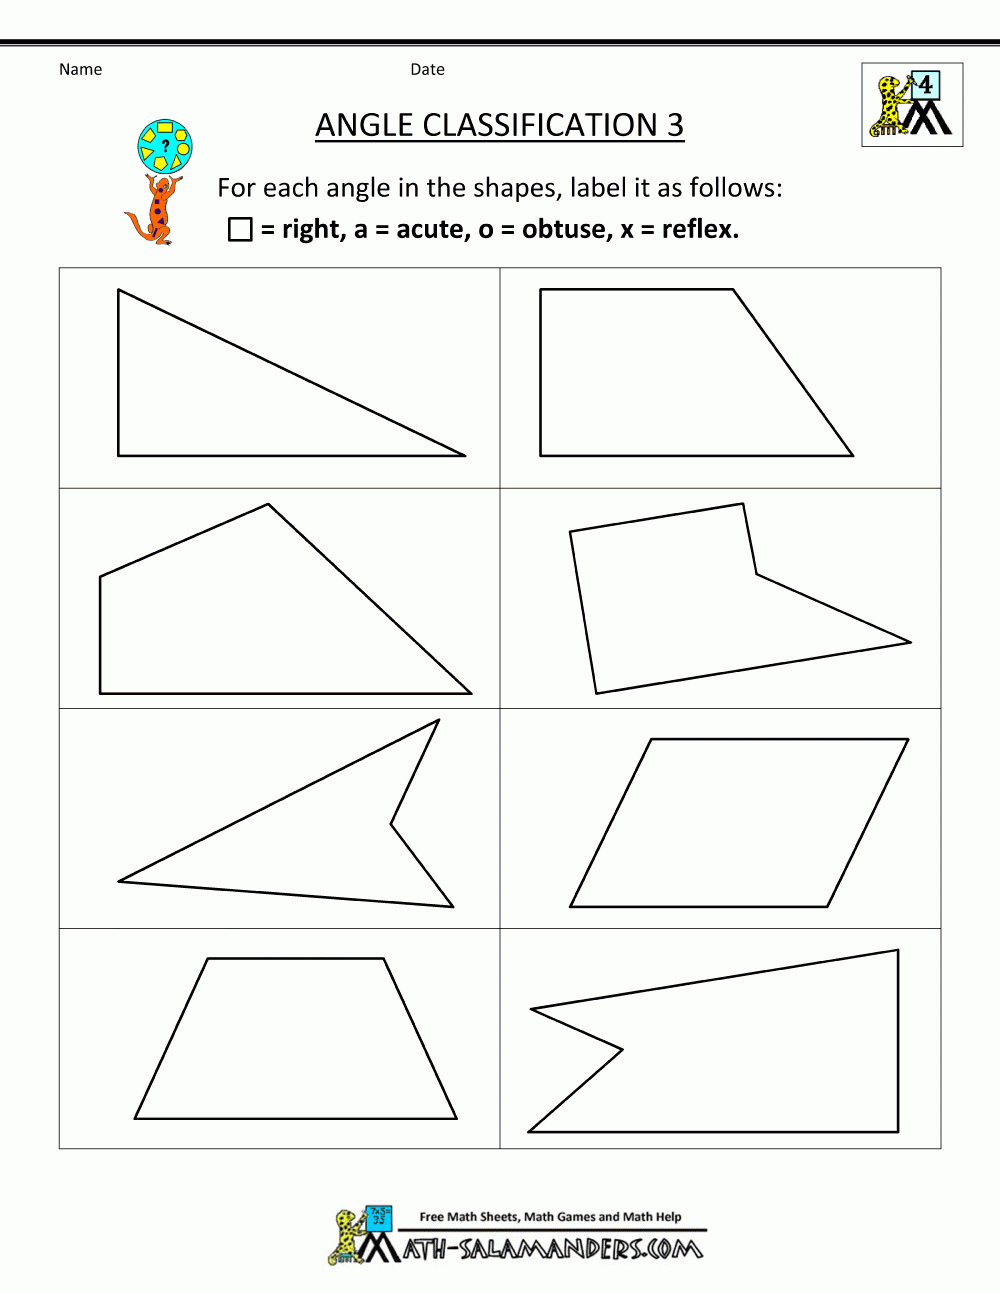 4th-grade-geometry-riddles-4agif-10001294-geometry-worksheets